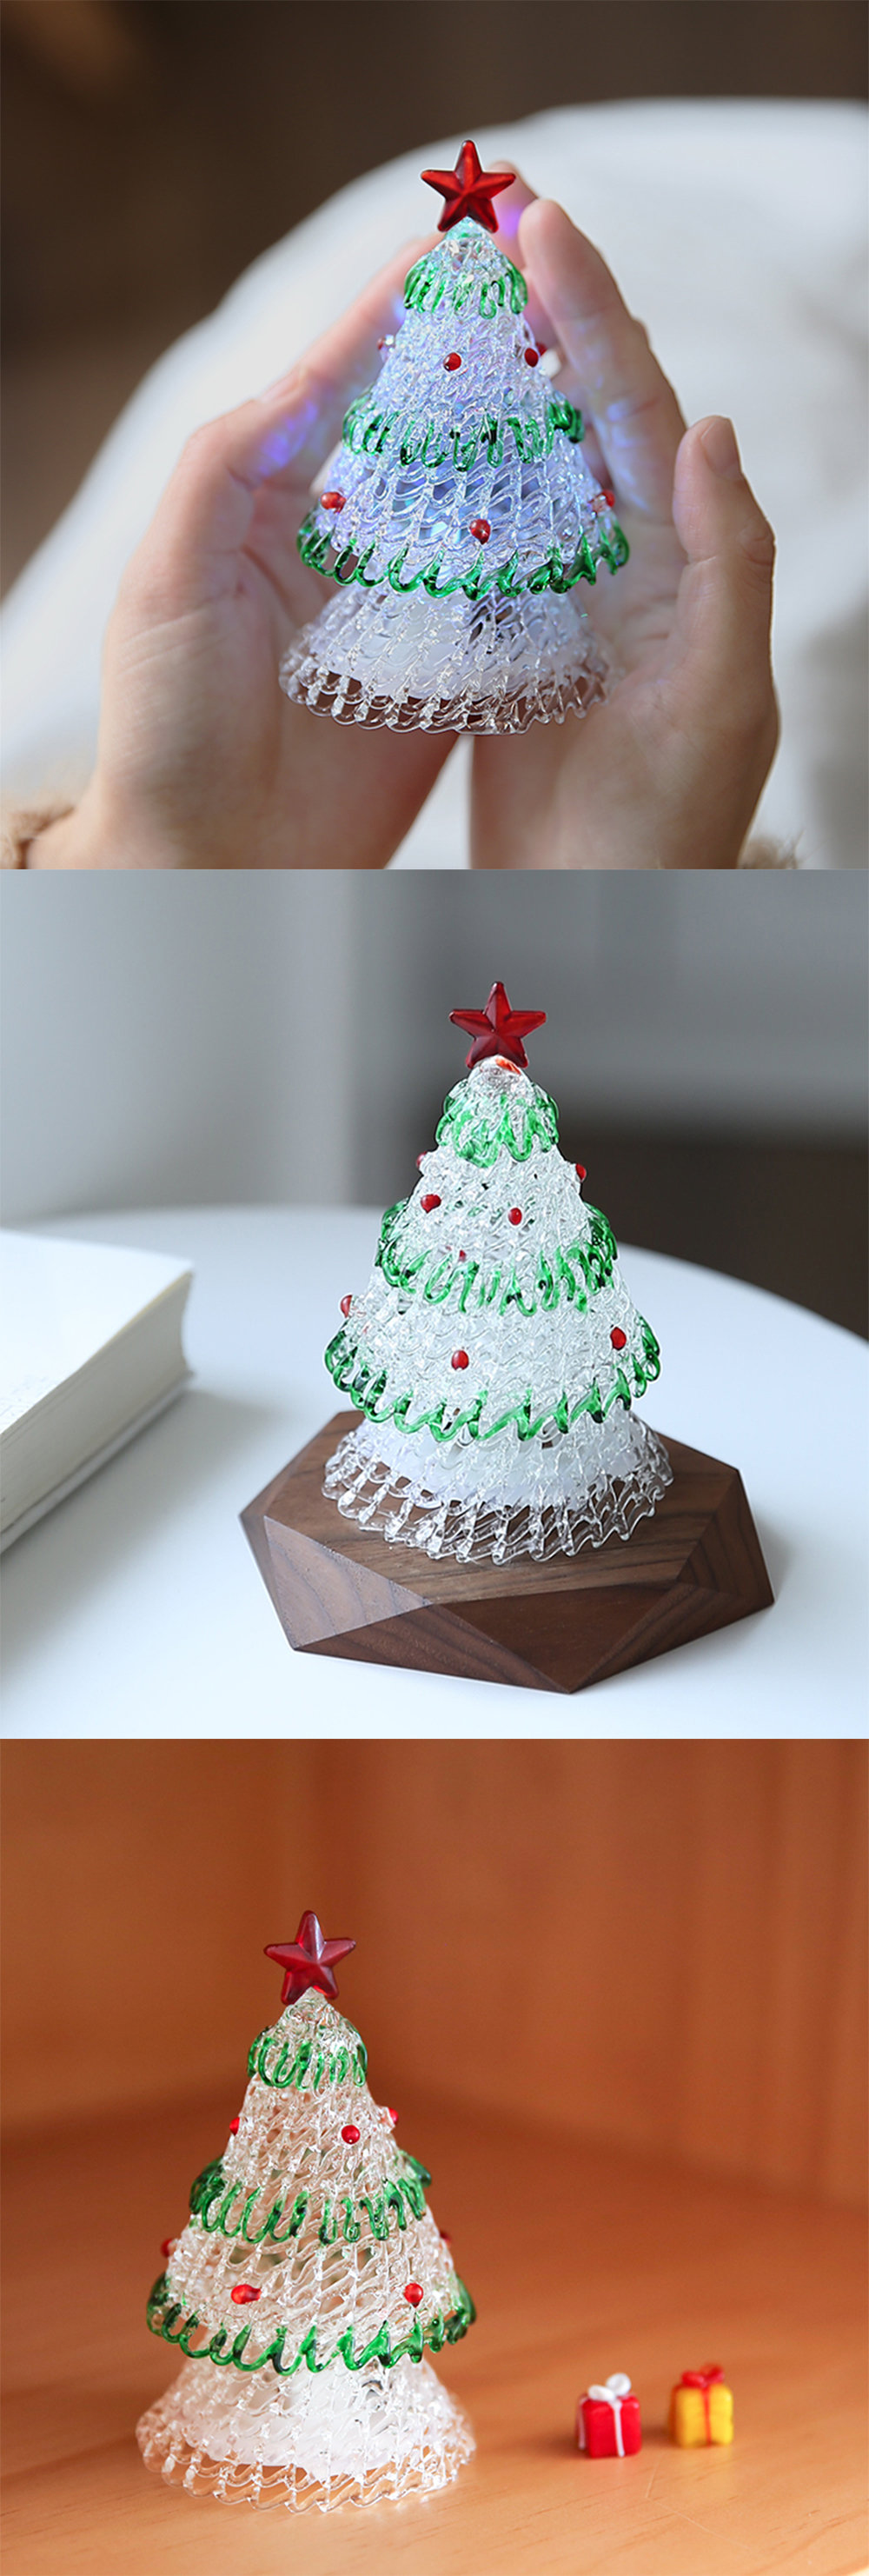 Light Up Glass Christmas Tree - Button Cell Powered - Cute Ornament ...